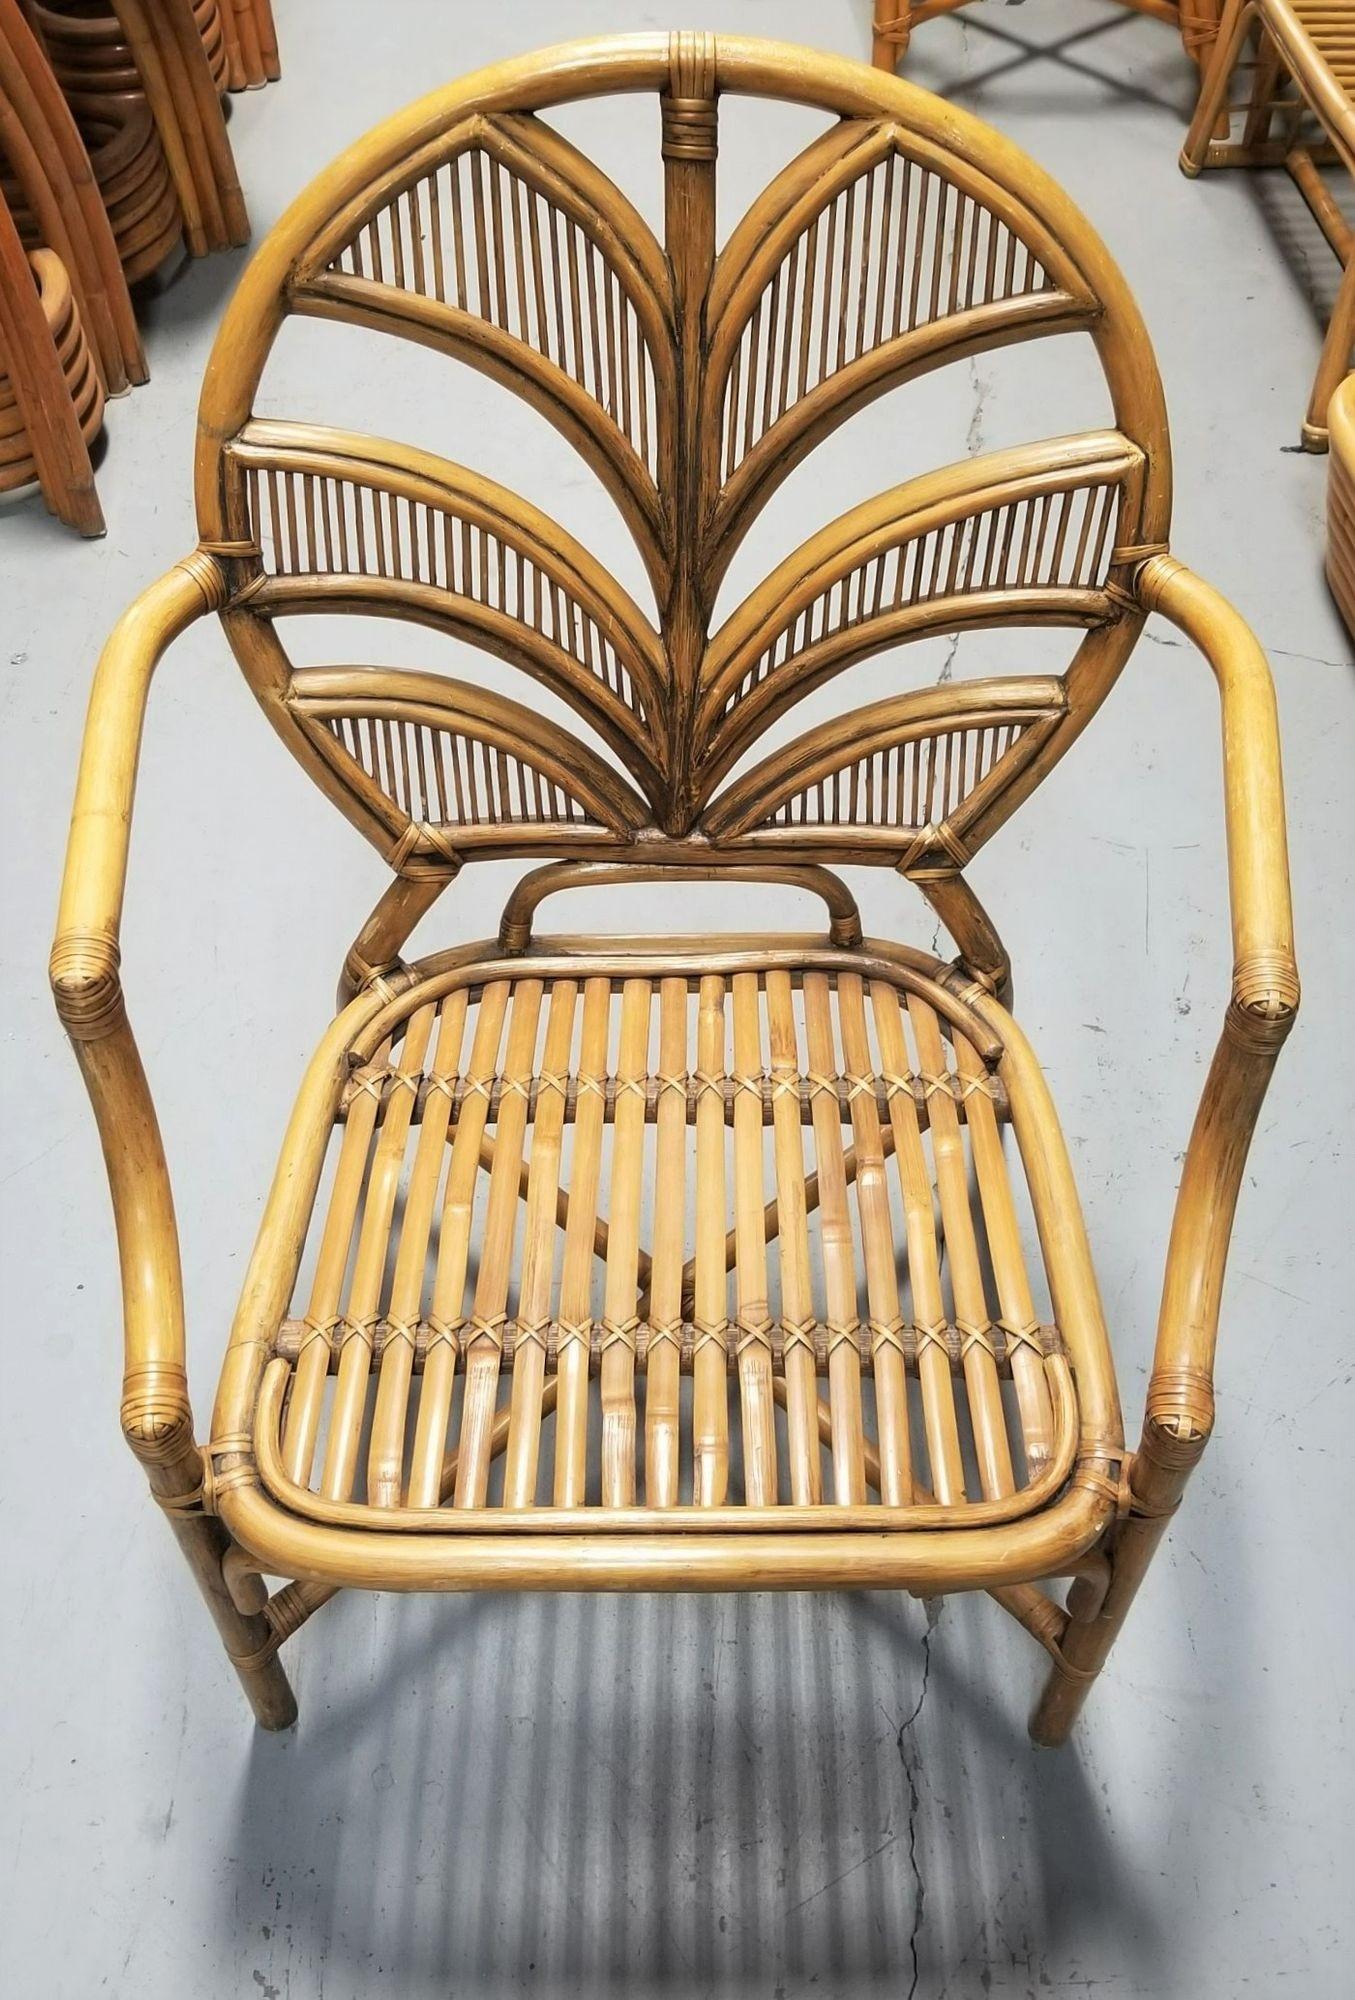 Restored split reed rattan tropical botanical fan back chairs and glass top dining table or desk set.

Set of table and 2 chairs.

Chairs. Cushions Made to Order. Custom cushions in C.O.M. (Customer's Own Material) are available, for a small fee.